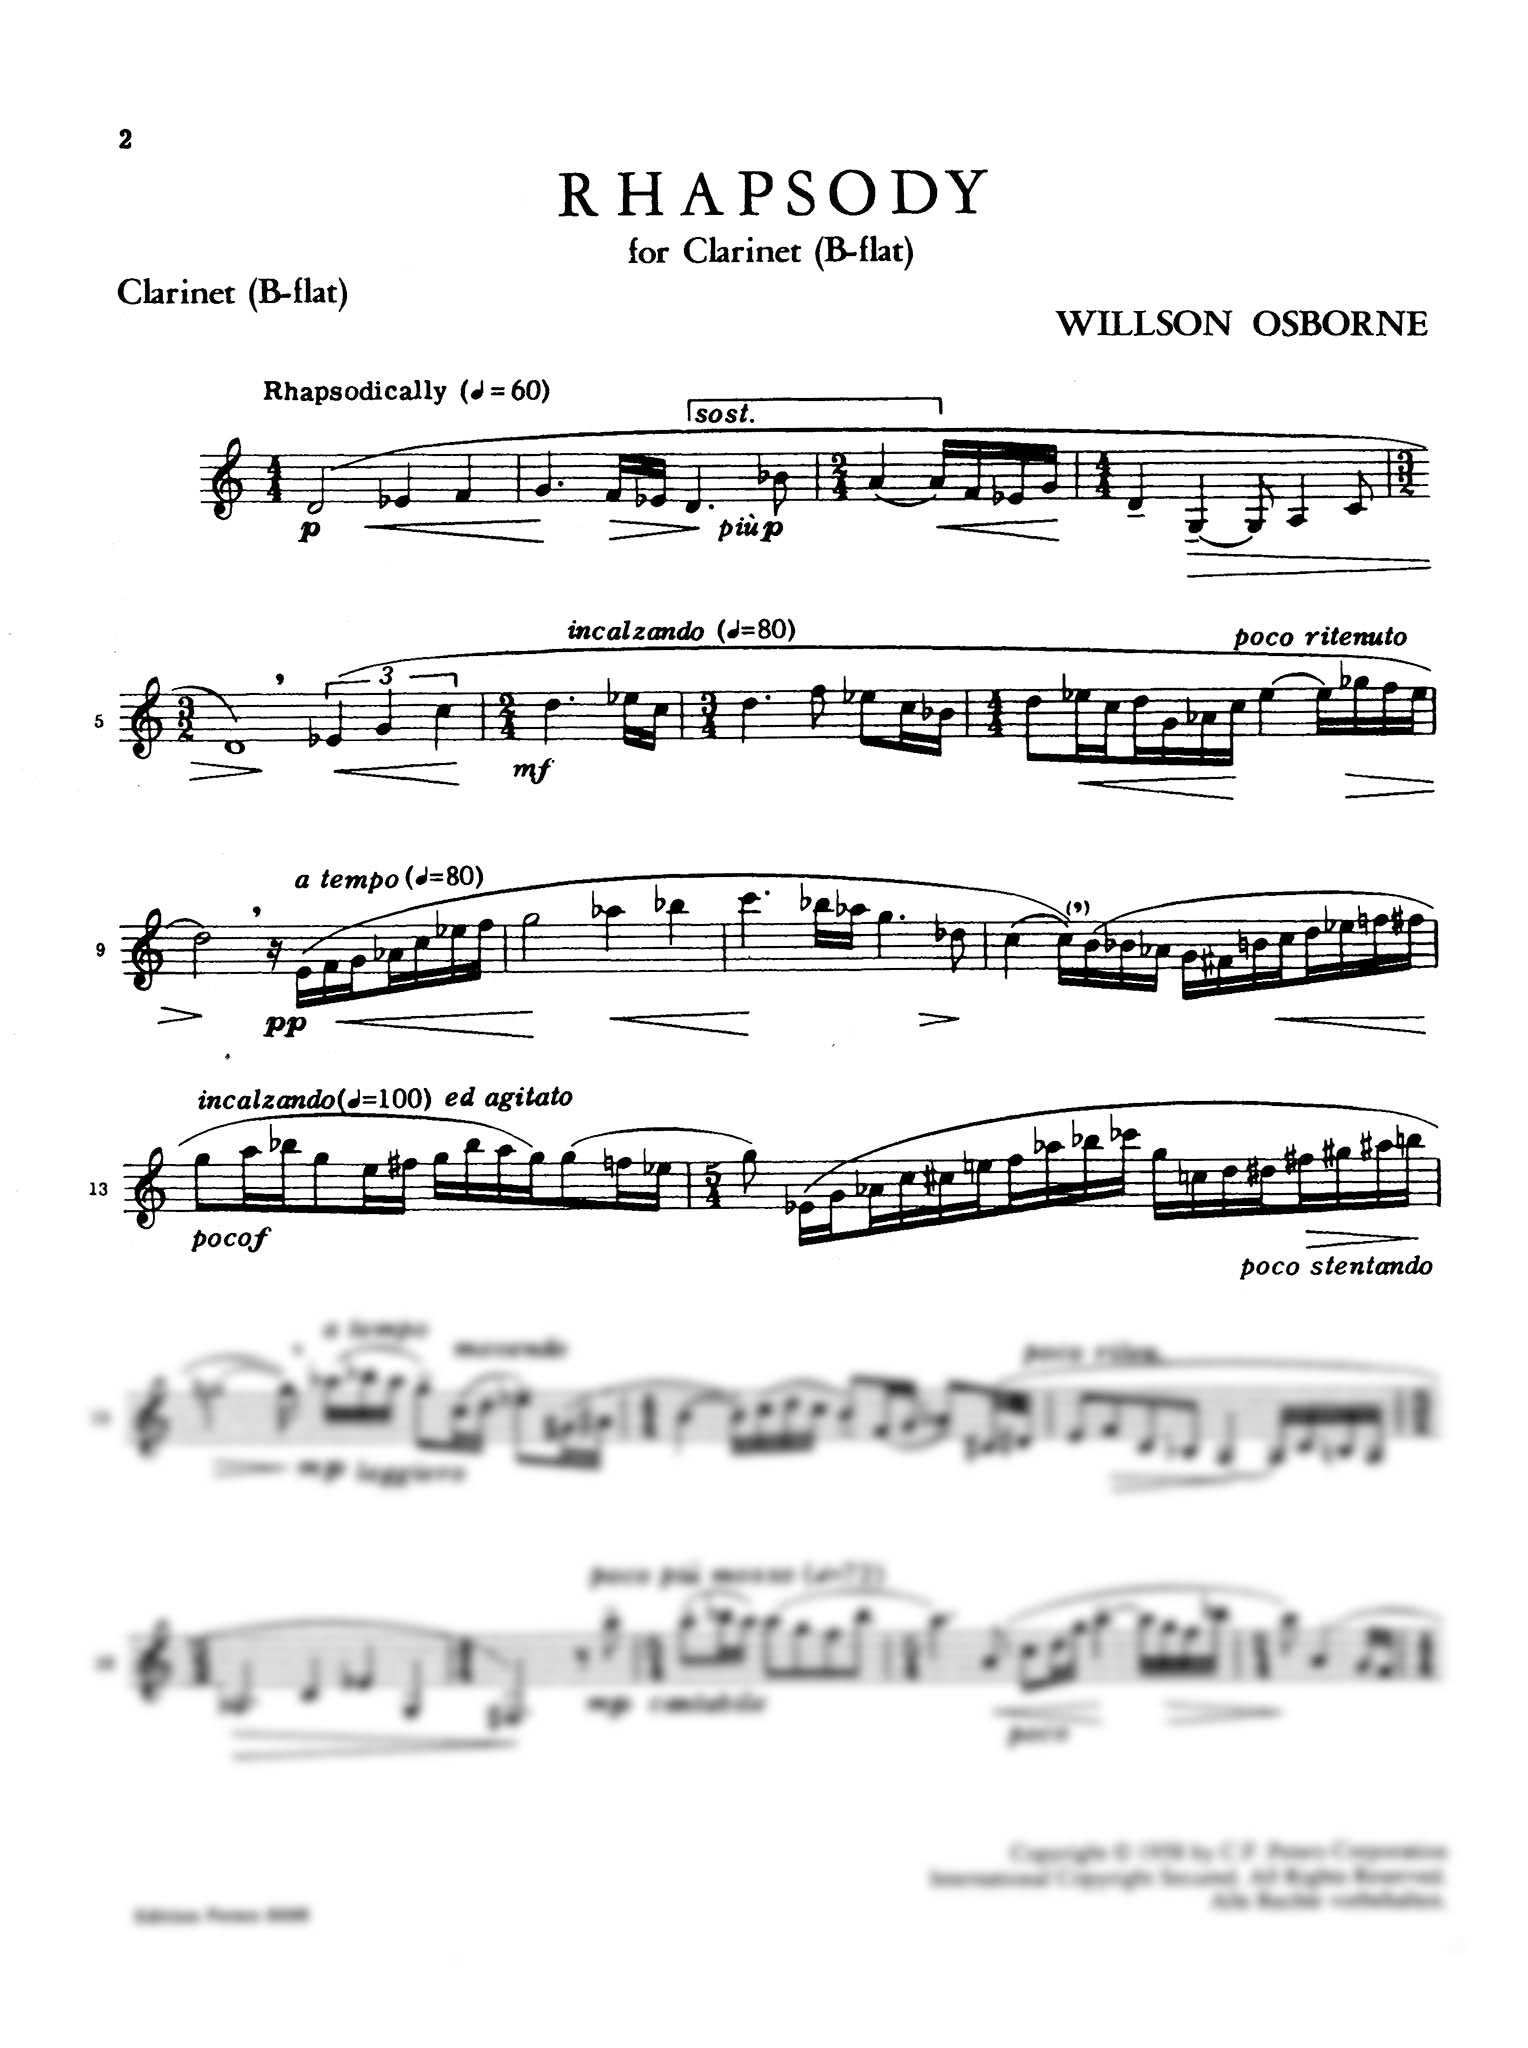 Rhapsody for Clarinet Page 1